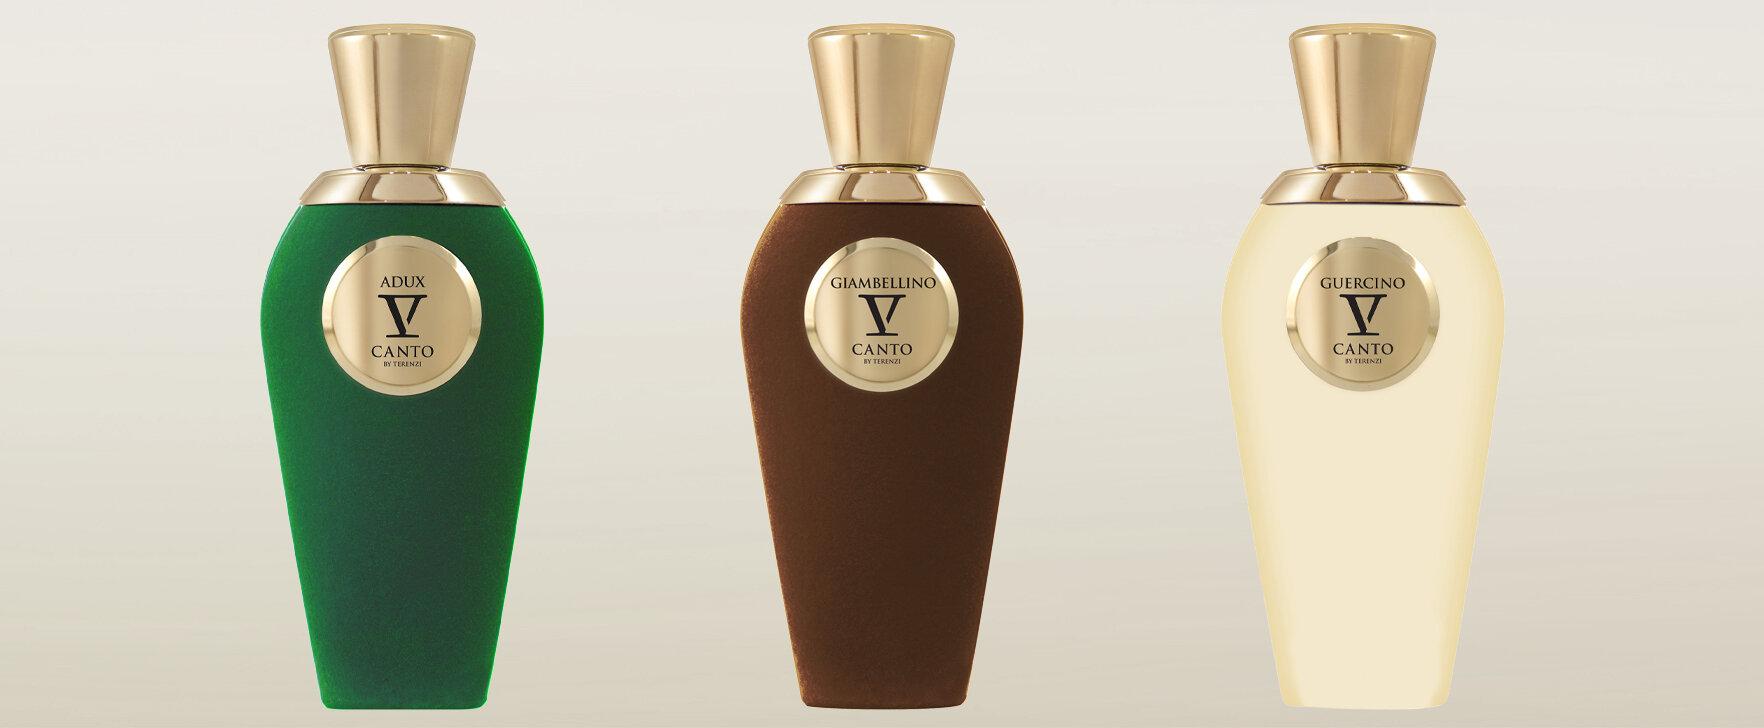 V Canto's New Fragrances Pay Homage to Great Artists: Adux, Giambellino and Guercino